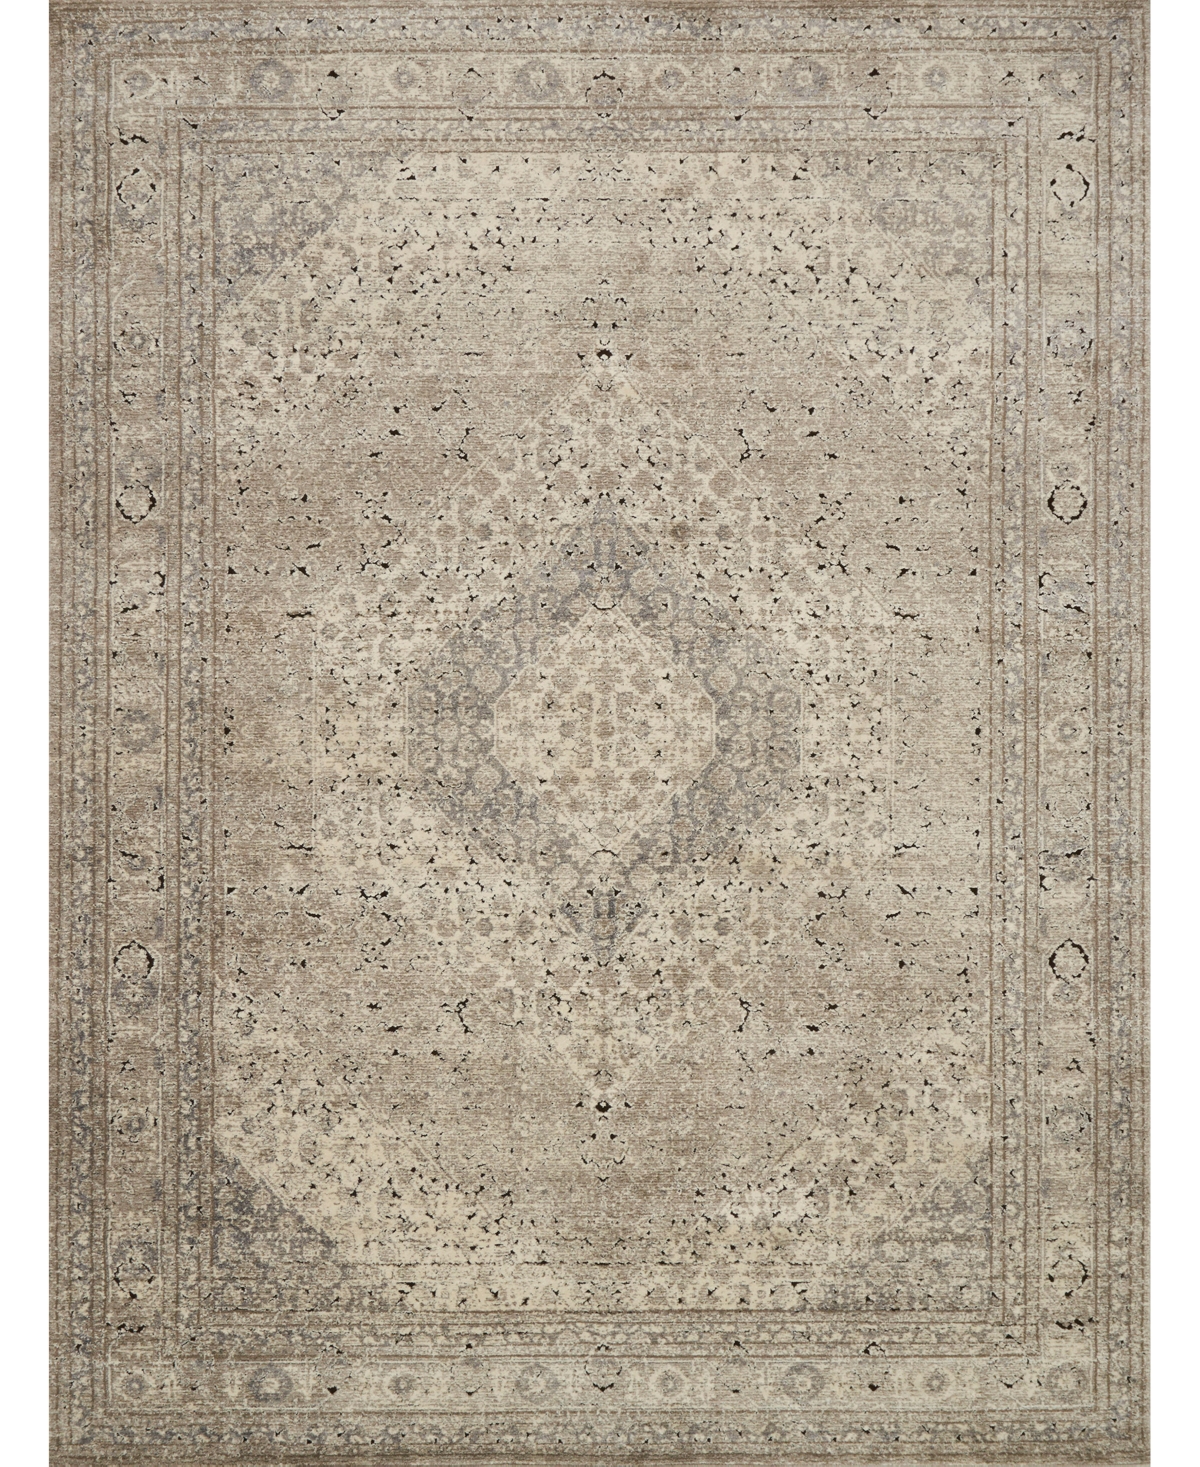 Loloi Millennium Mv-03 7'10in x 10'6in Area Rug - Sand, Ivory